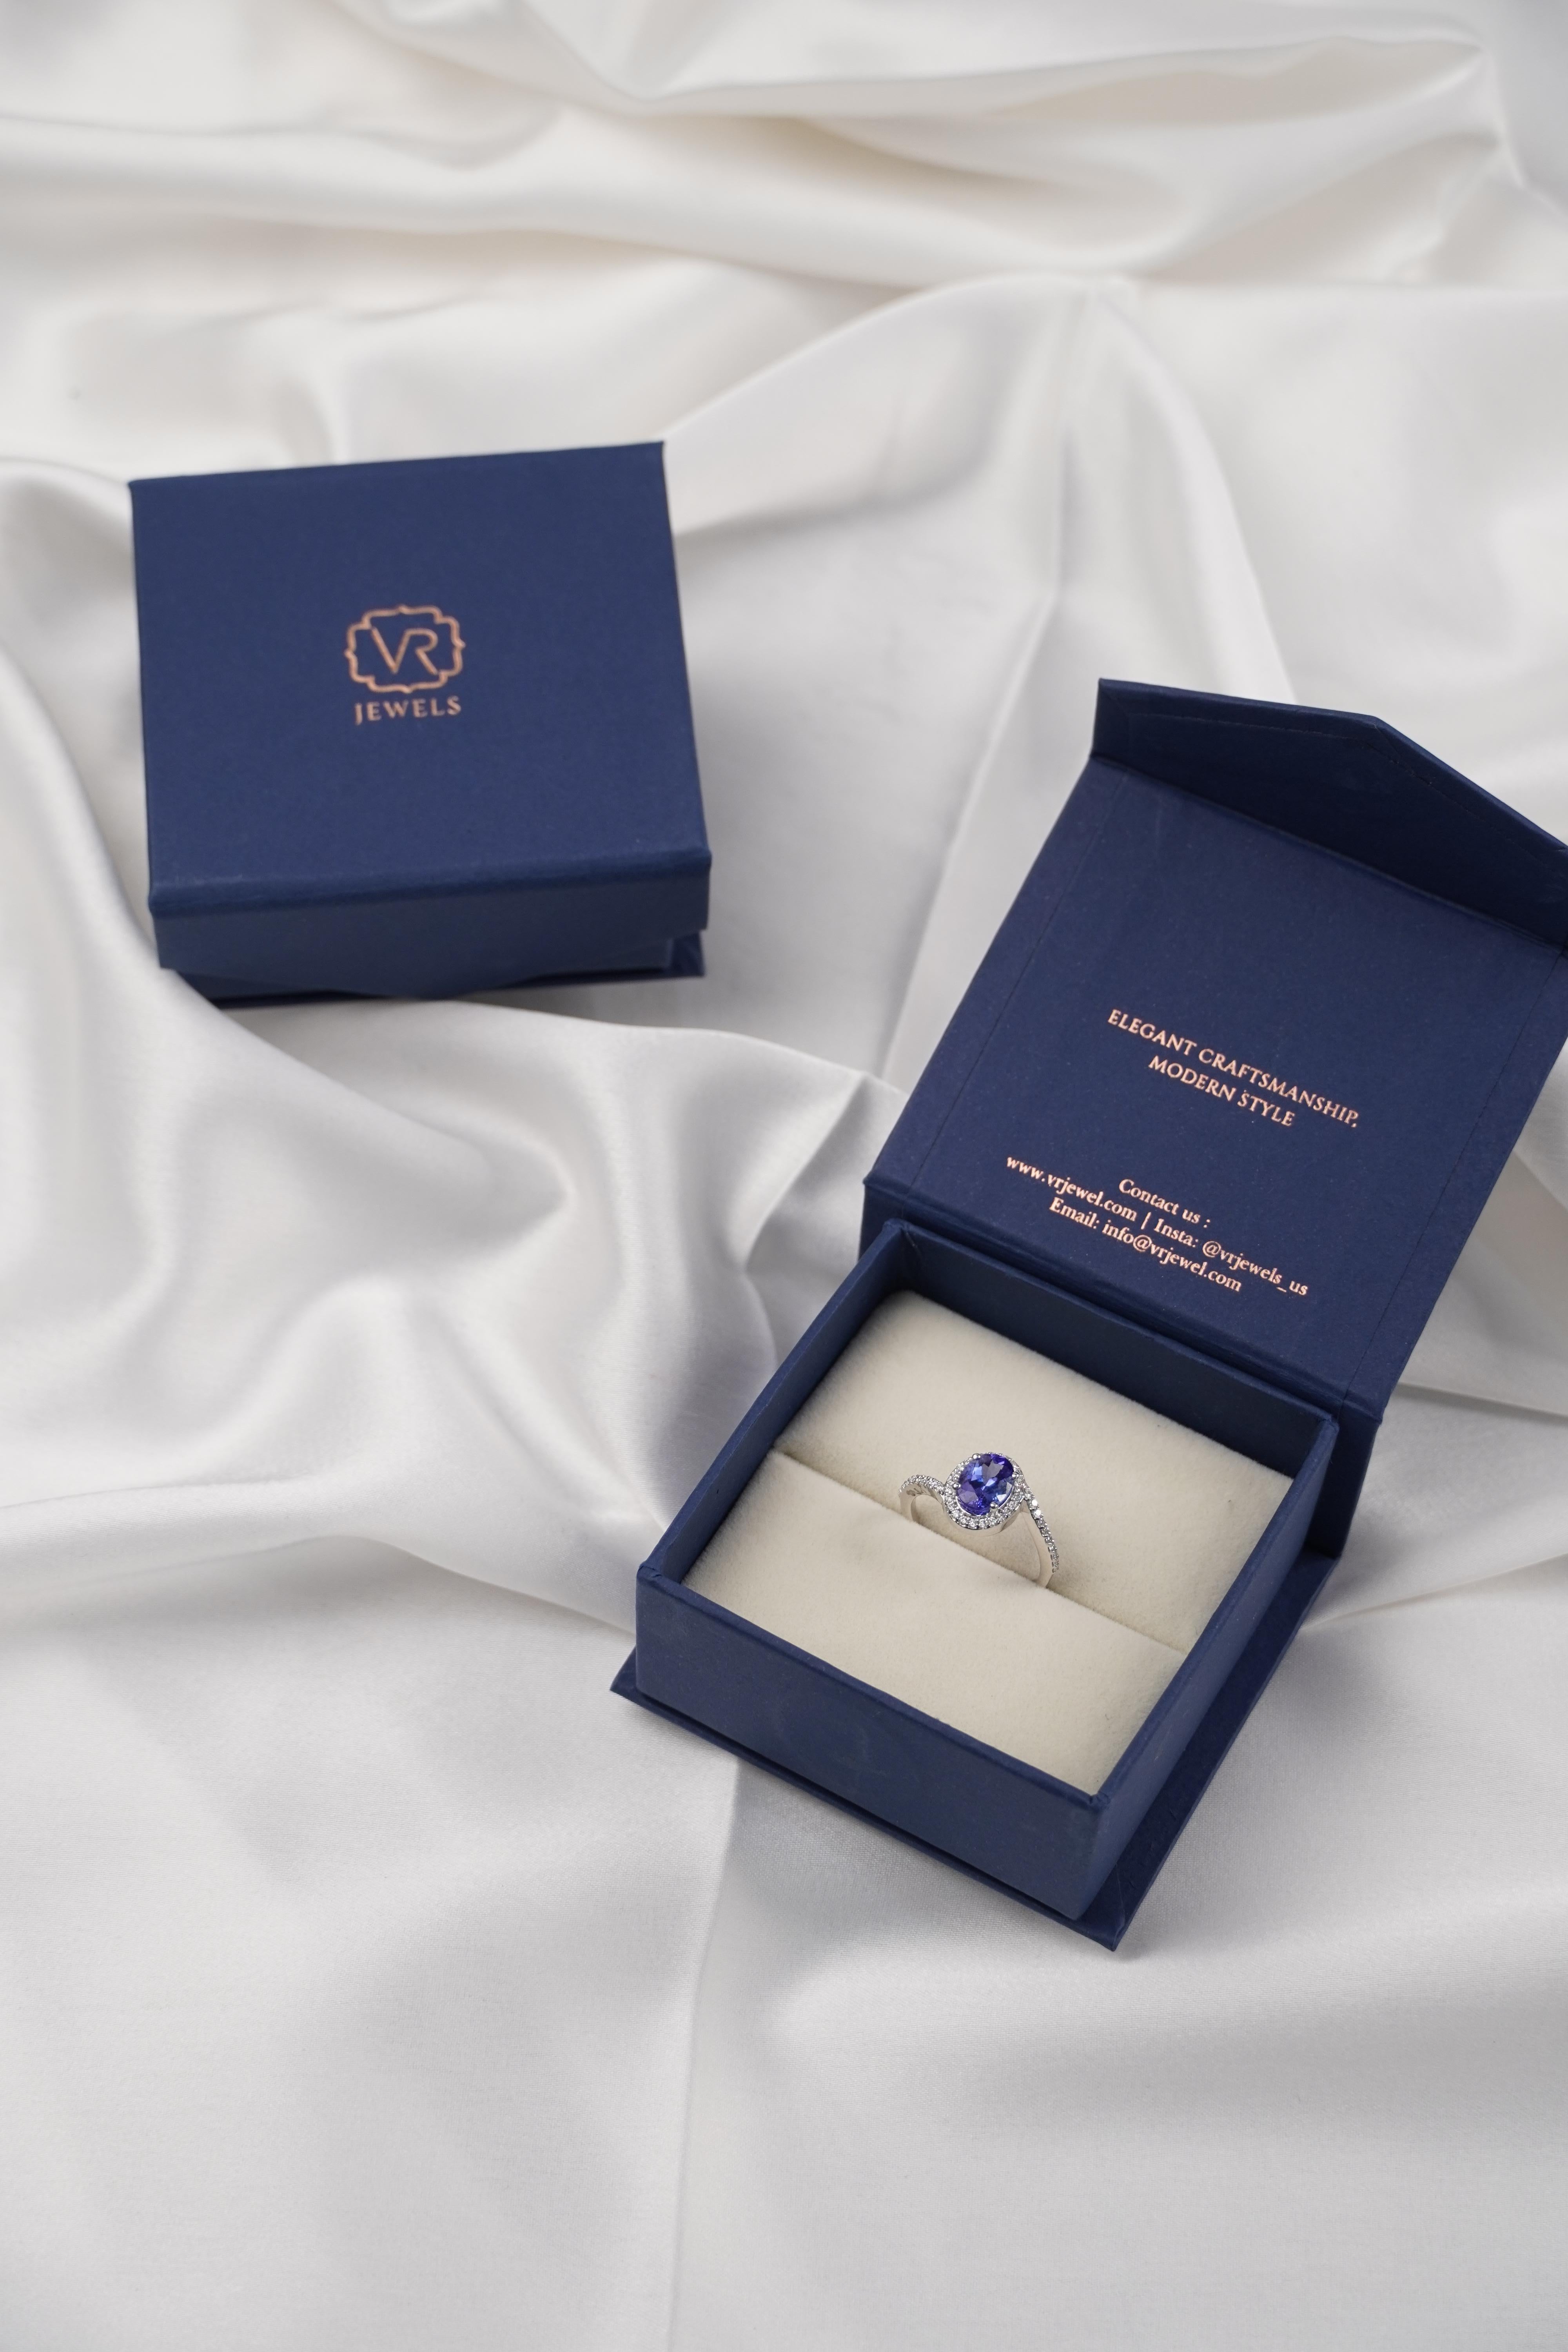 For Sale:  18kt Solid White Gold 6.43 ct Cushion Blue Sapphire Diamond Cocktail Ring 7